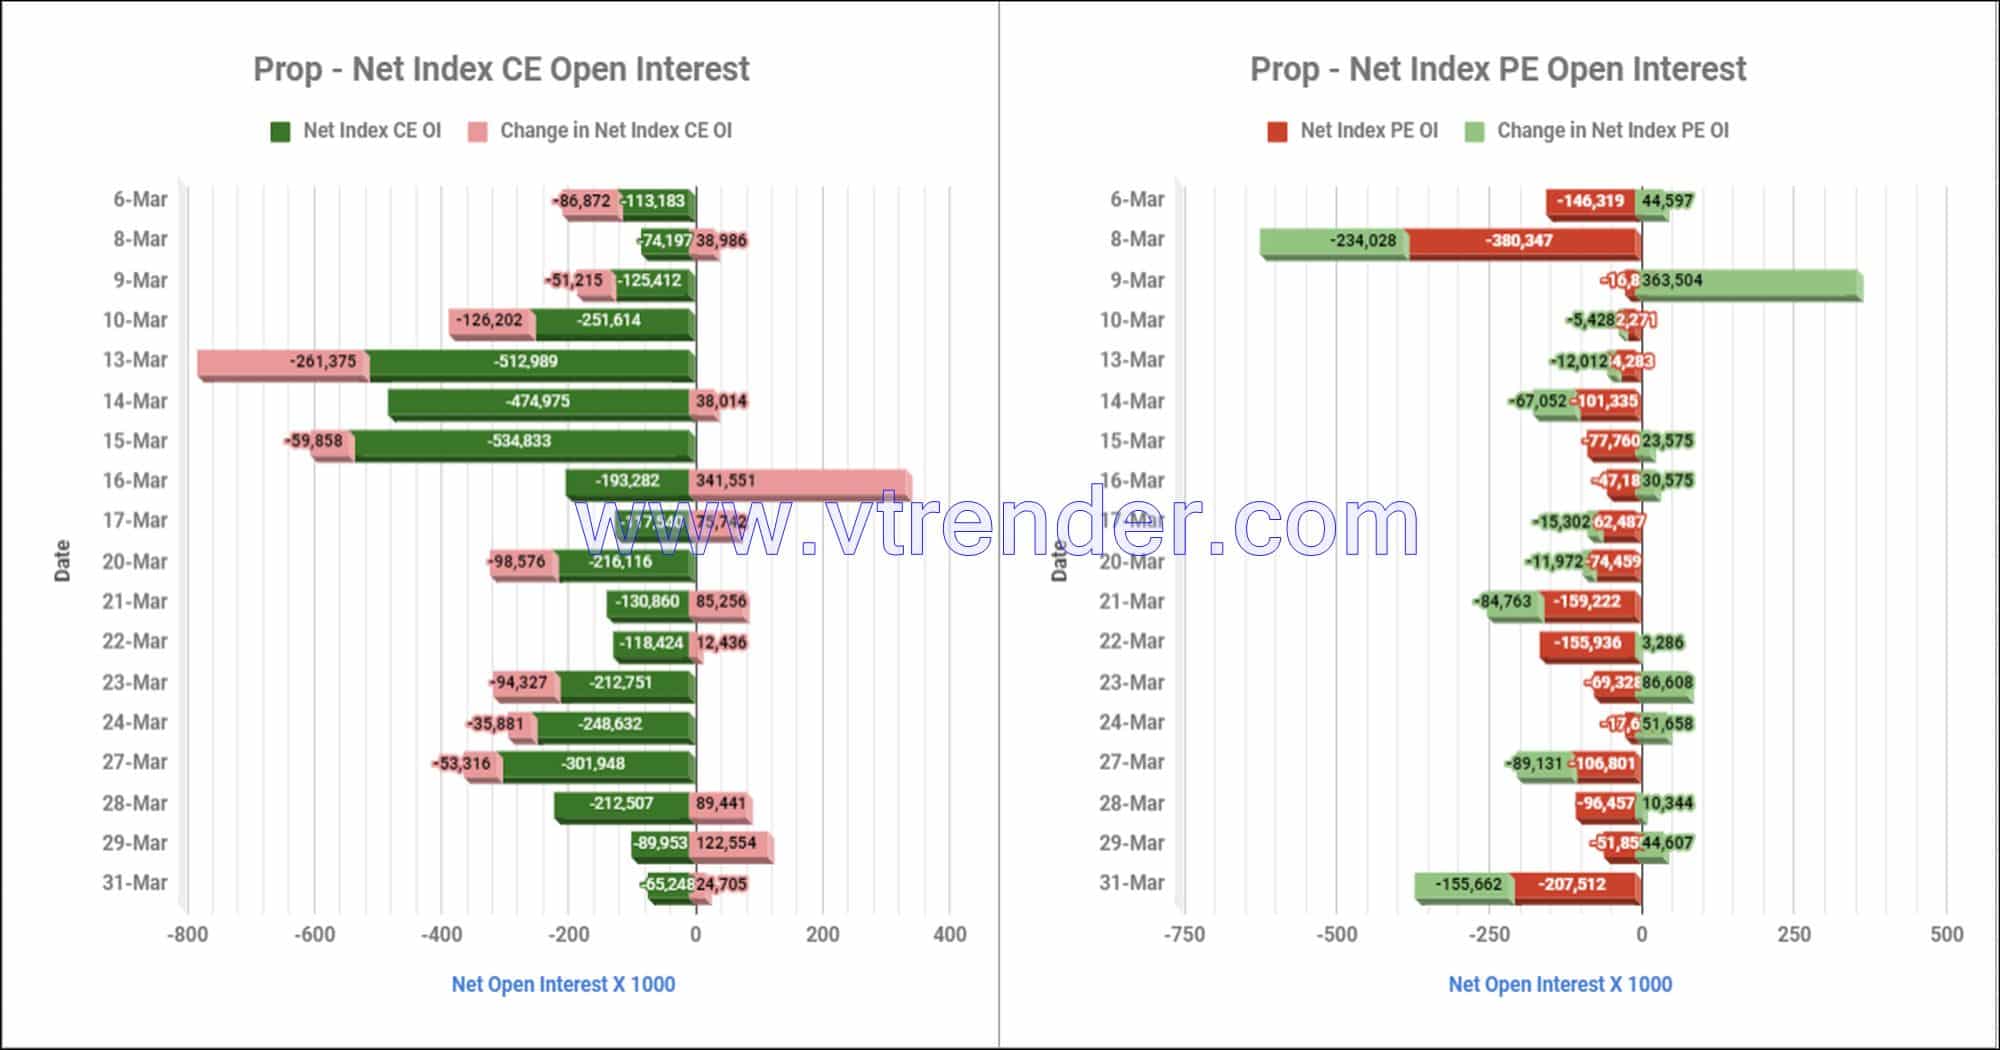 Proinop31Mar Participantwise Net Open Interest And Net Equity Investments – 31St Mar 2023 Client, Equity, Fii, Index Futures, Index Options, Open Interest, Prop